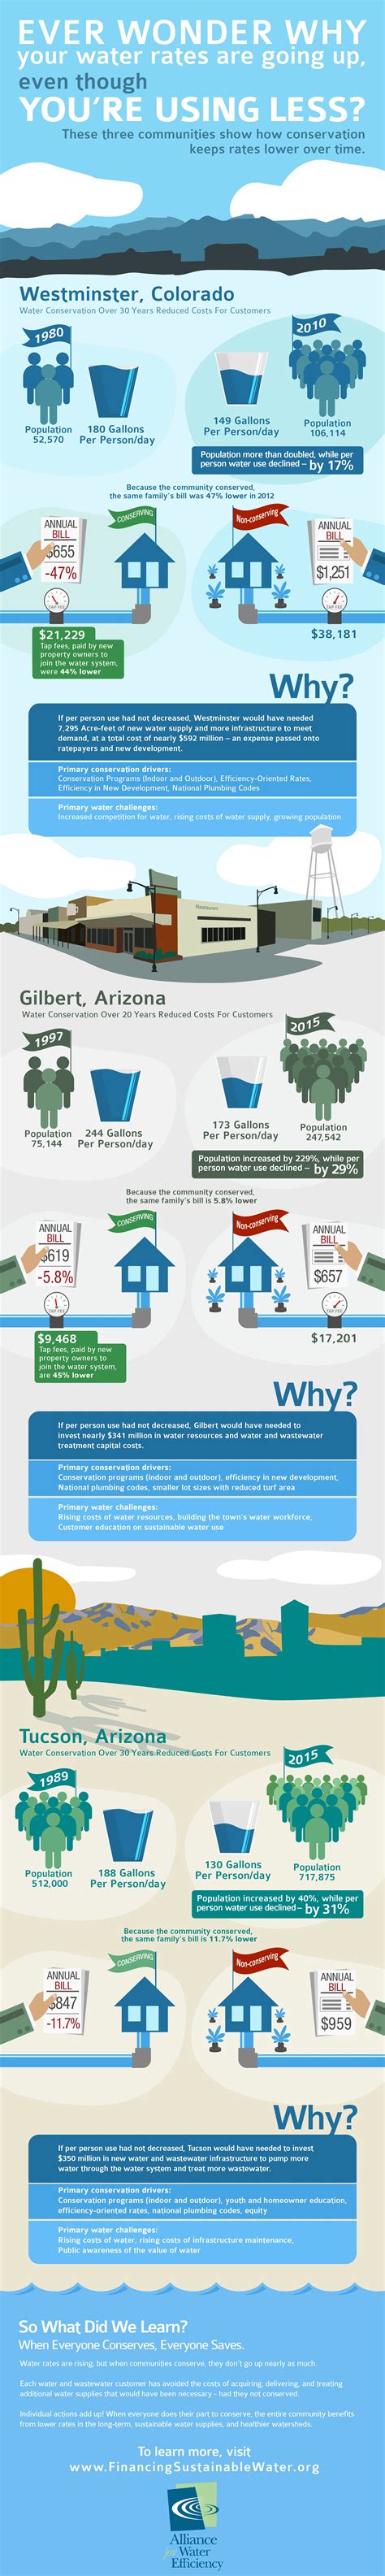 Infographic: When Everyone Conserves, Everyone Saves | Financing Sustainable Water